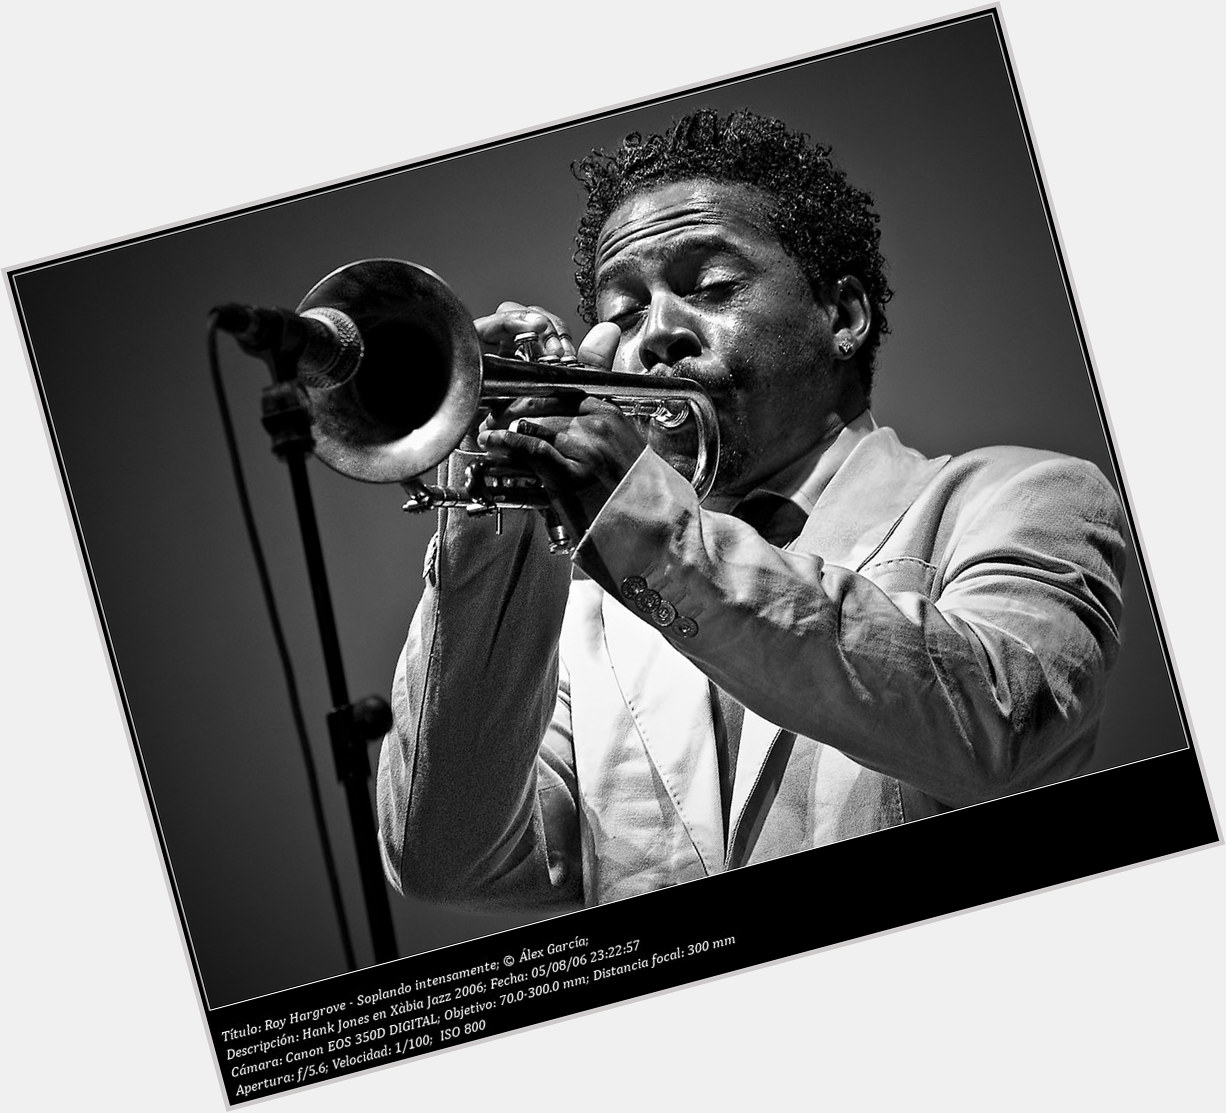 Http://fanpagepress.net/m/R/Roy Hargrove Marriage 7